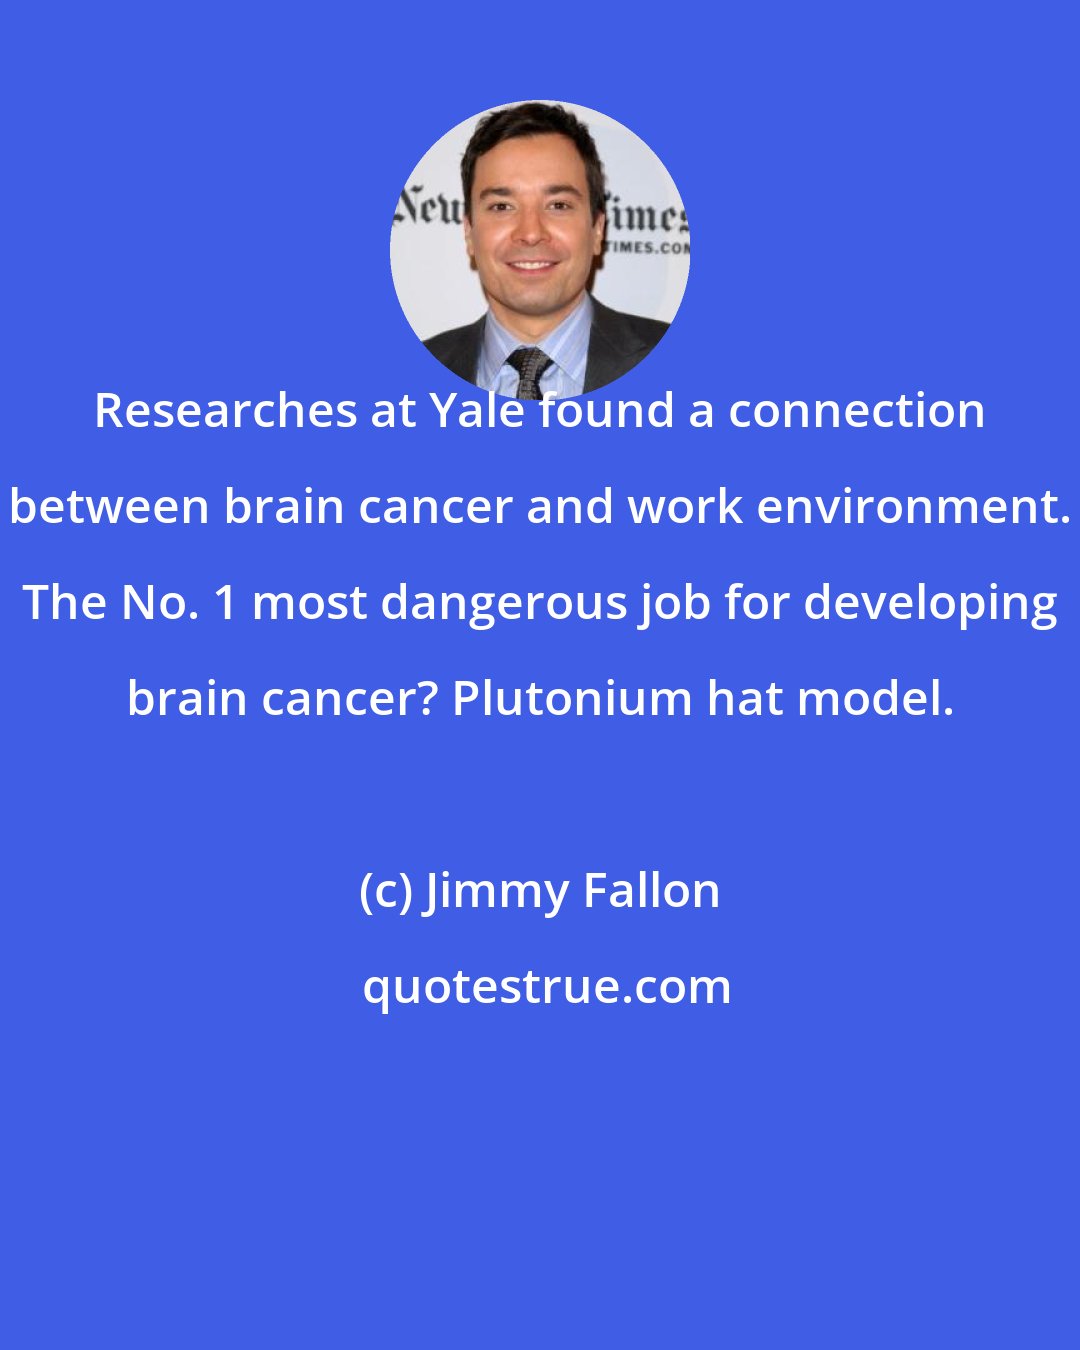 Jimmy Fallon: Researches at Yale found a connection between brain cancer and work environment. The No. 1 most dangerous job for developing brain cancer? Plutonium hat model.